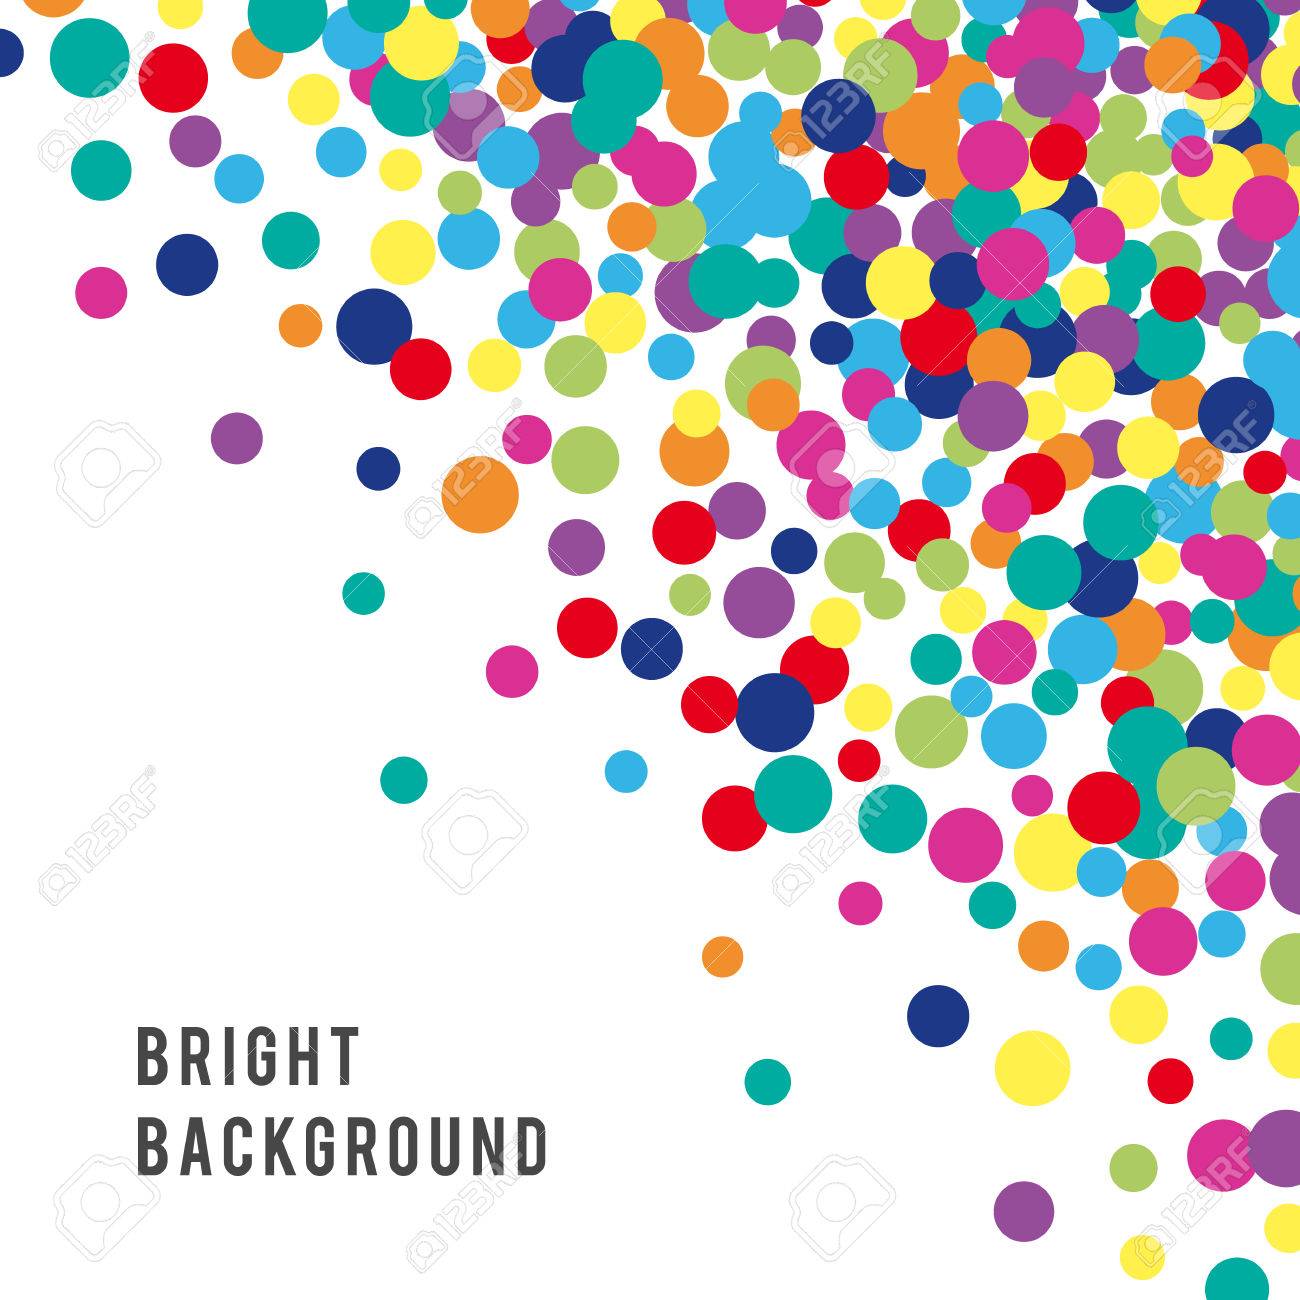 Colorful Abstract Spot Background Vector Illustration For Bright